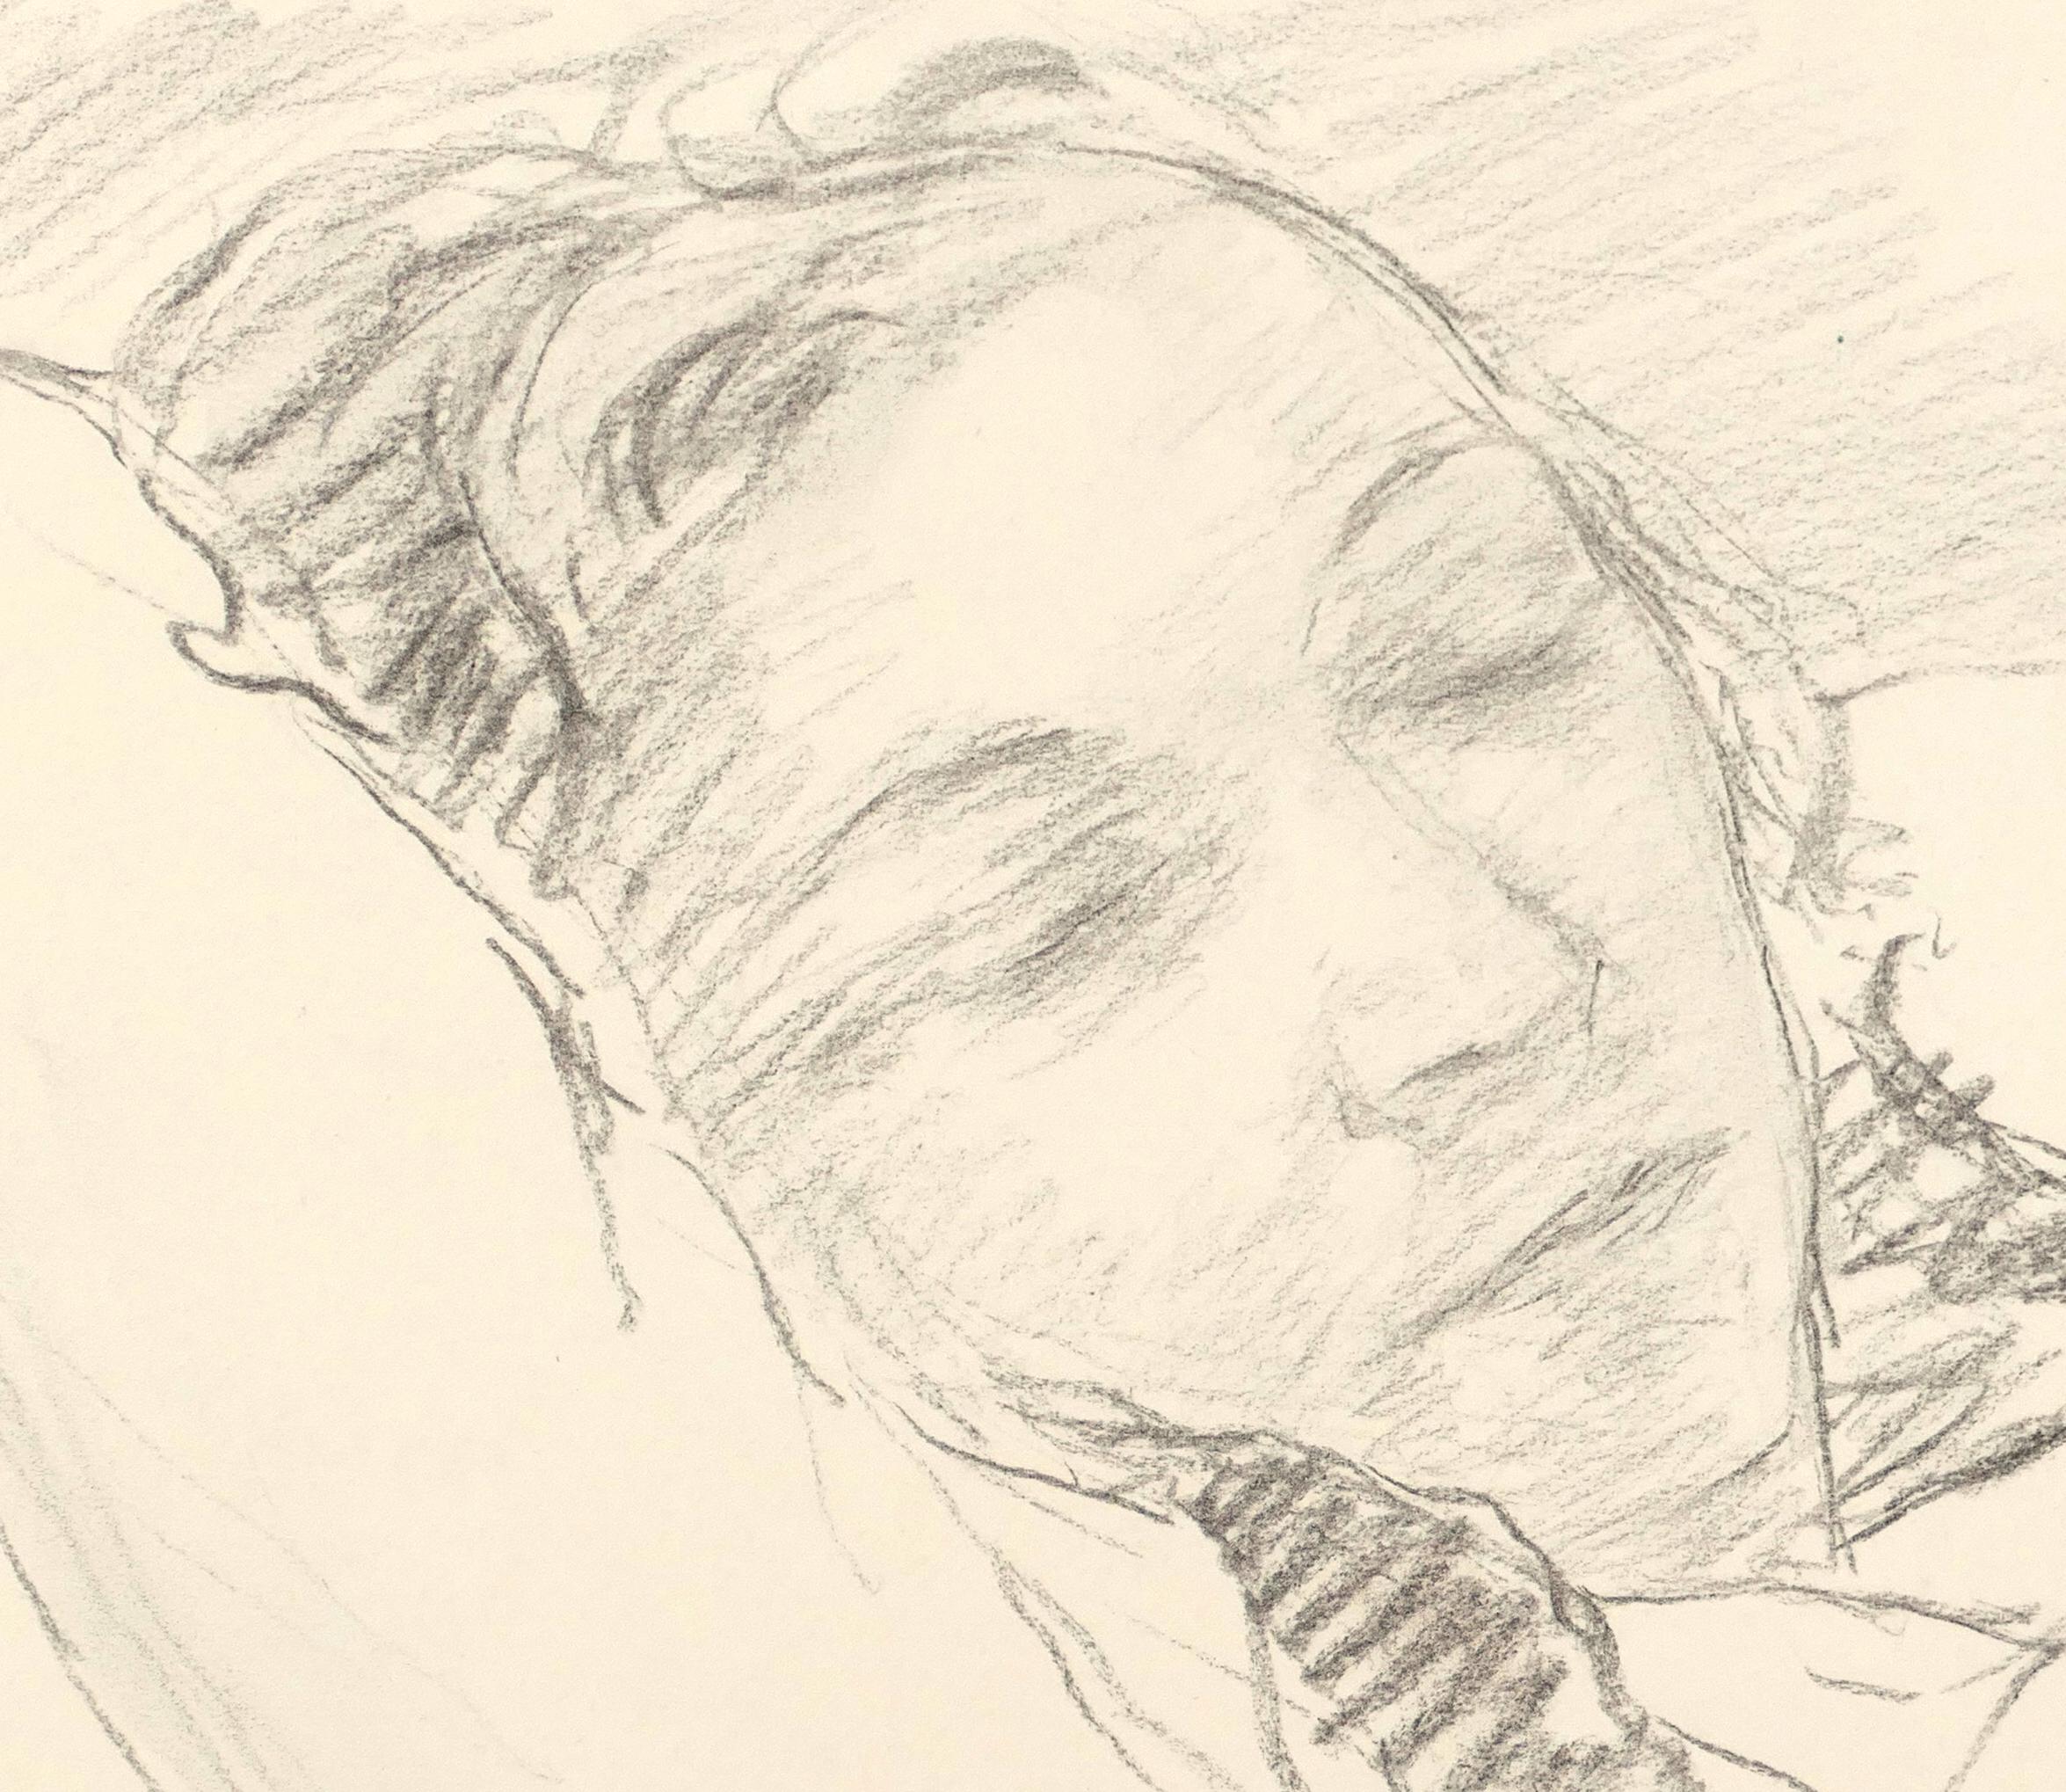 Sleeping Girl - Charcoal Drawing and watercolor by S. Fontinsky - 1940s - Art by Serge Fontinsky